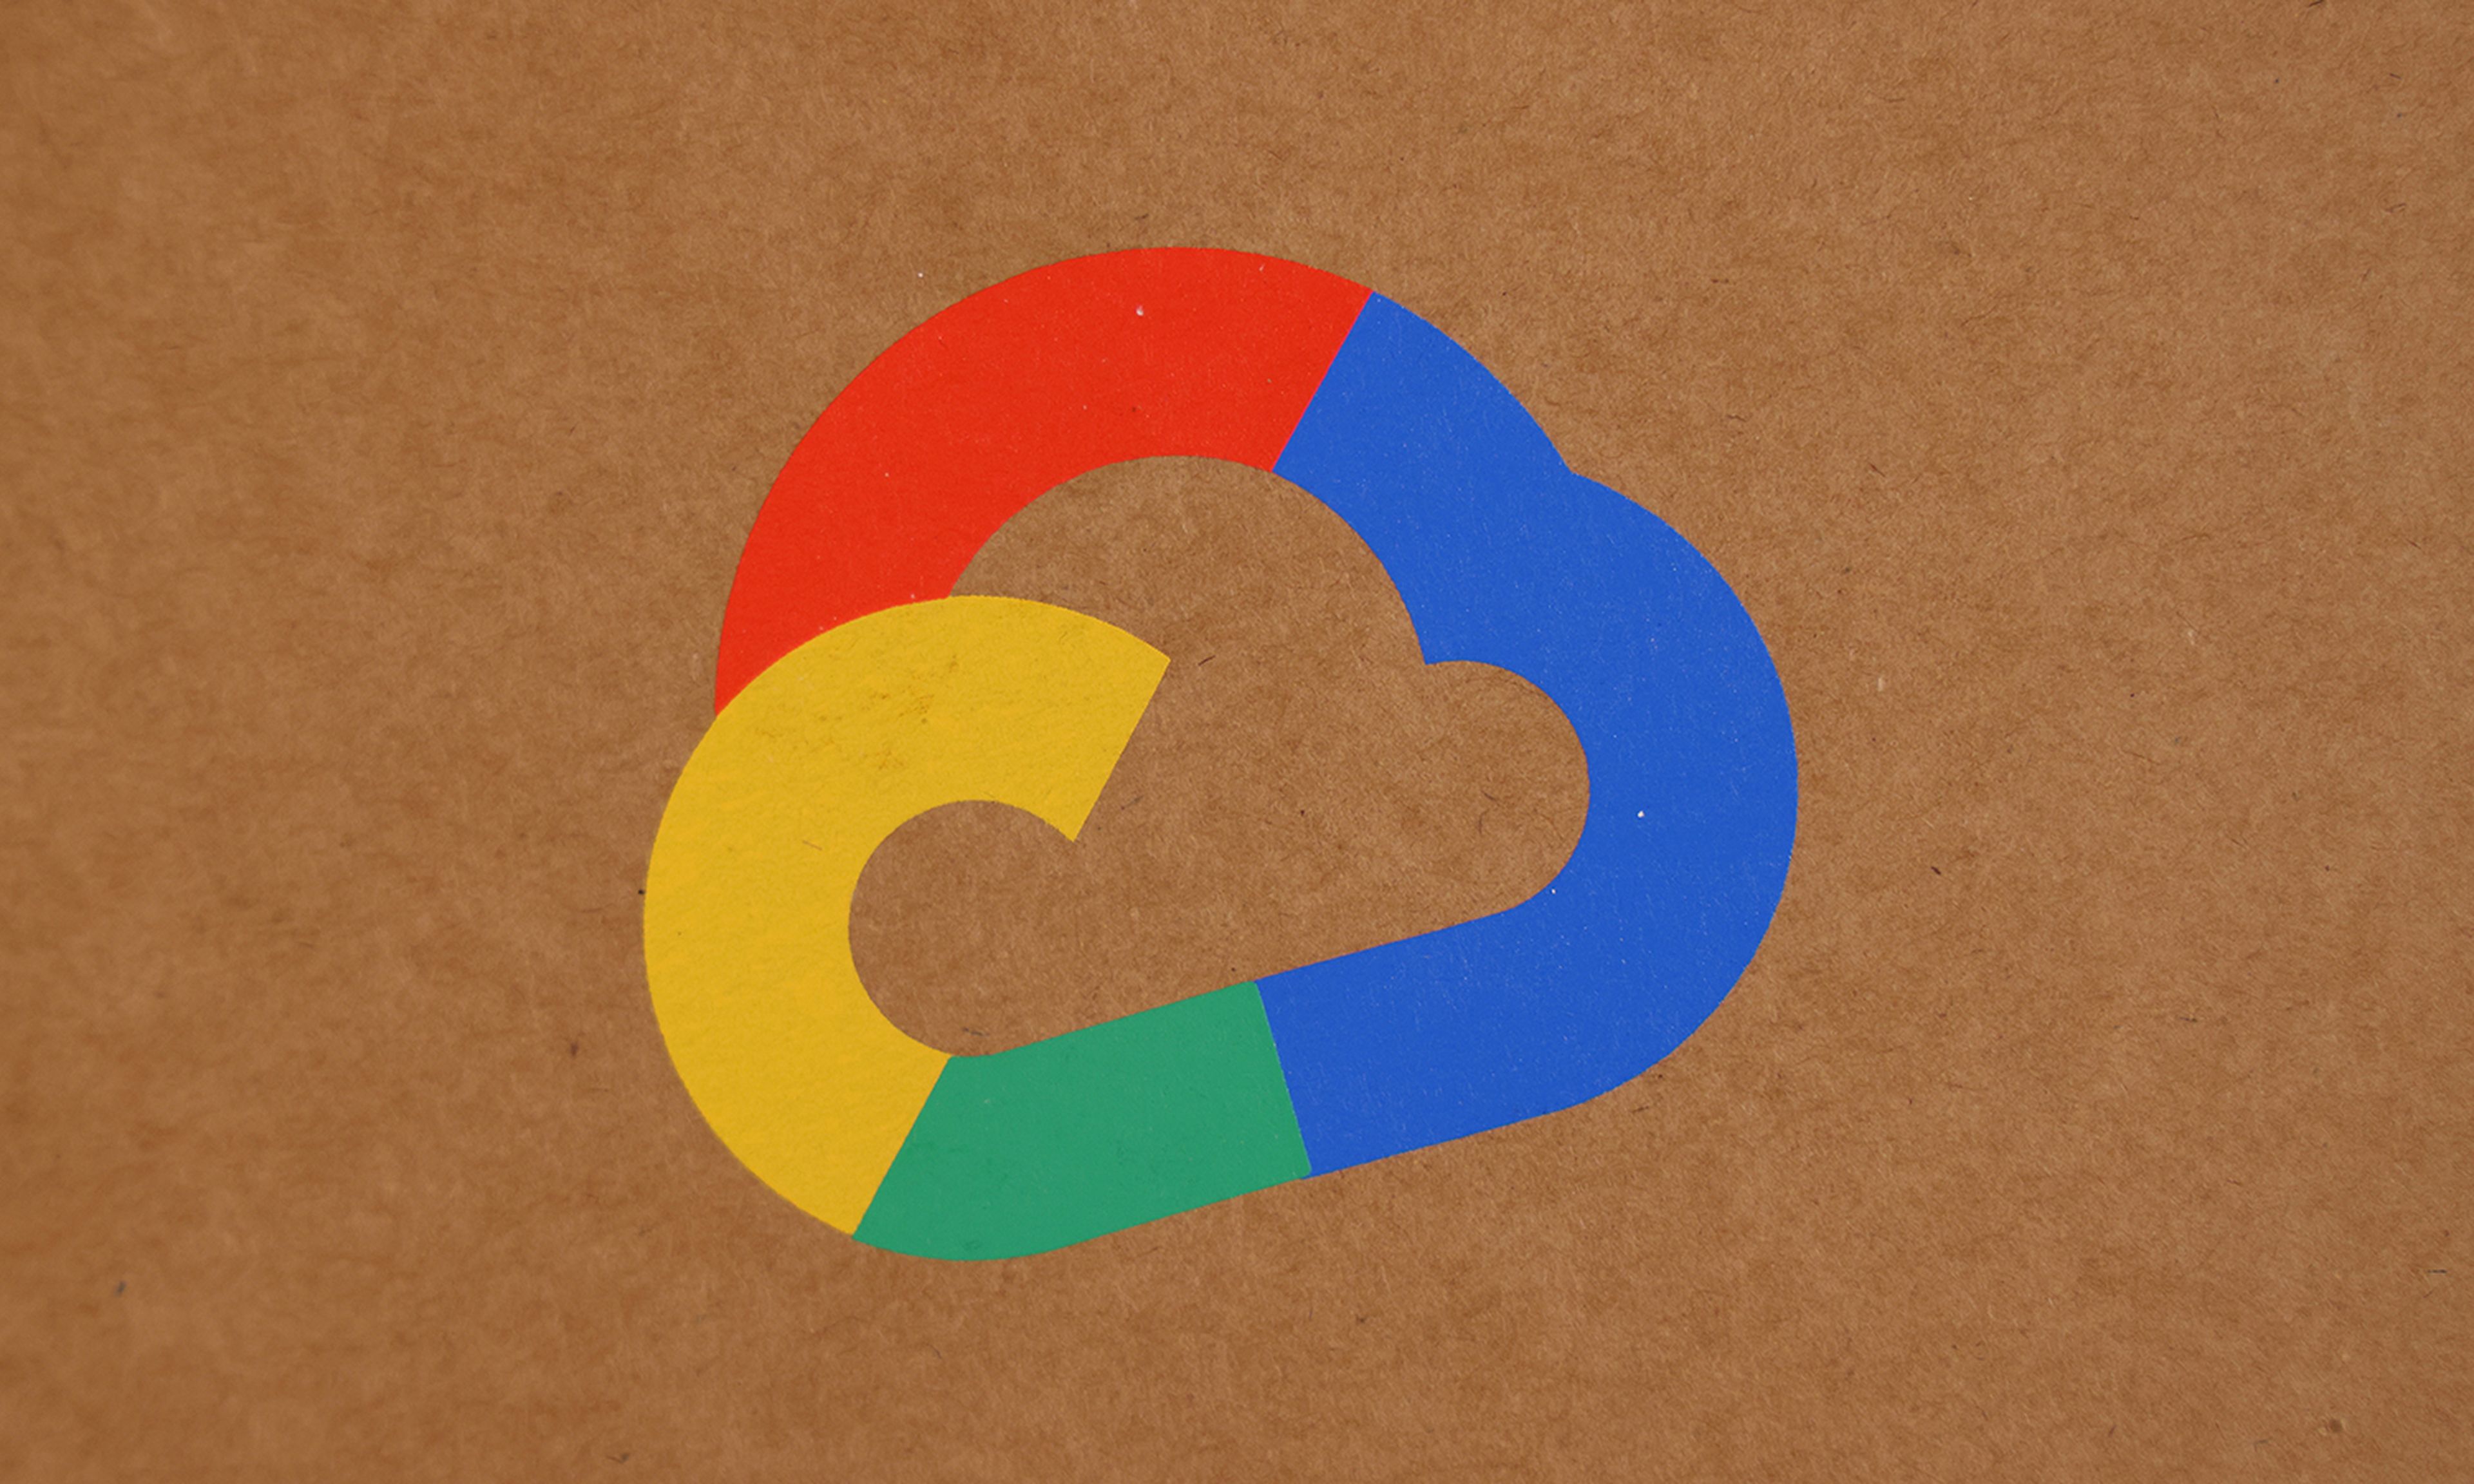 The Google Cloud logo is seen on a notebook at the Google Germany offices on Aug. 31, 2021, in Berlin, Germany. (Photo by Sean Gallup/Getty Images)